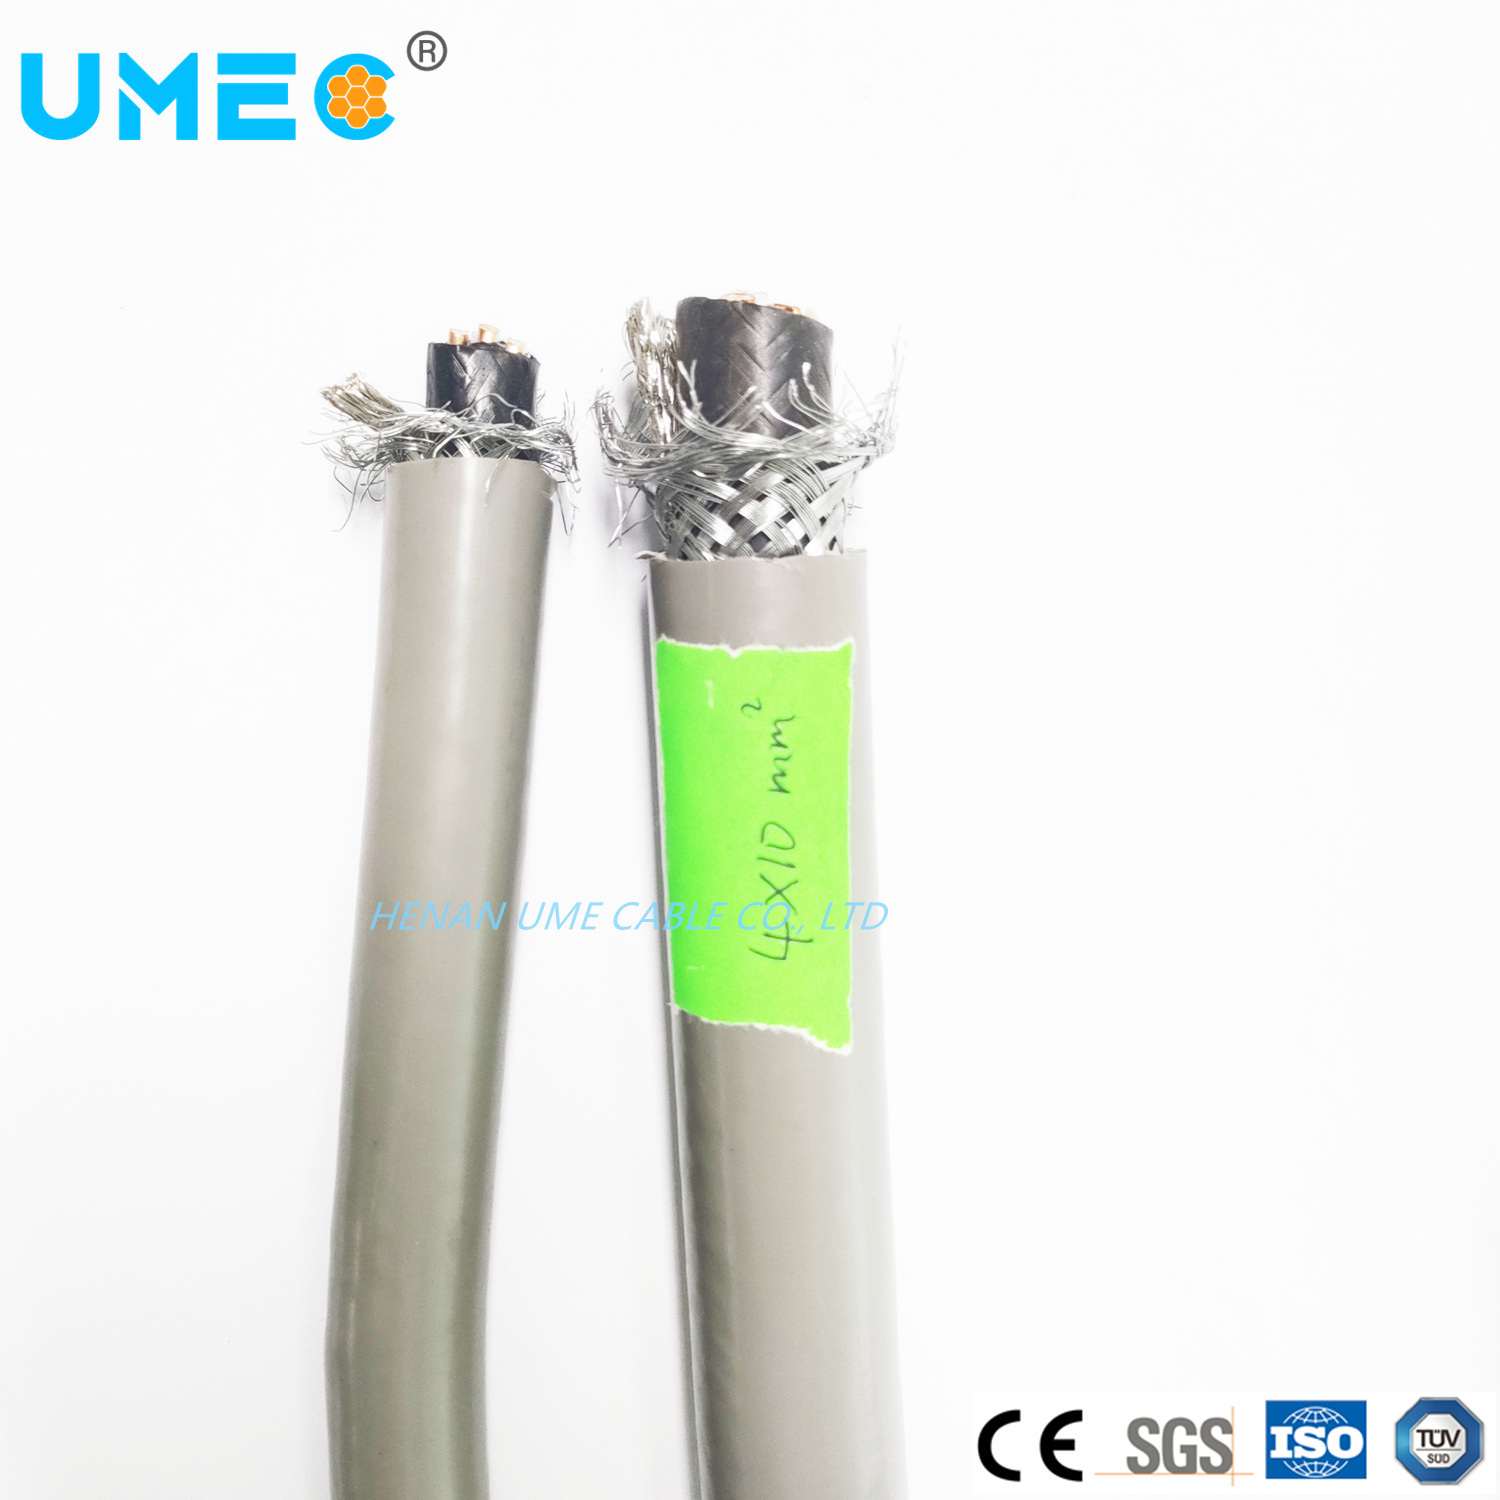 Underground Galvanized Steel Wire Braided Armour Cable Class1/2 Copper Vo-Ymvkas Cable